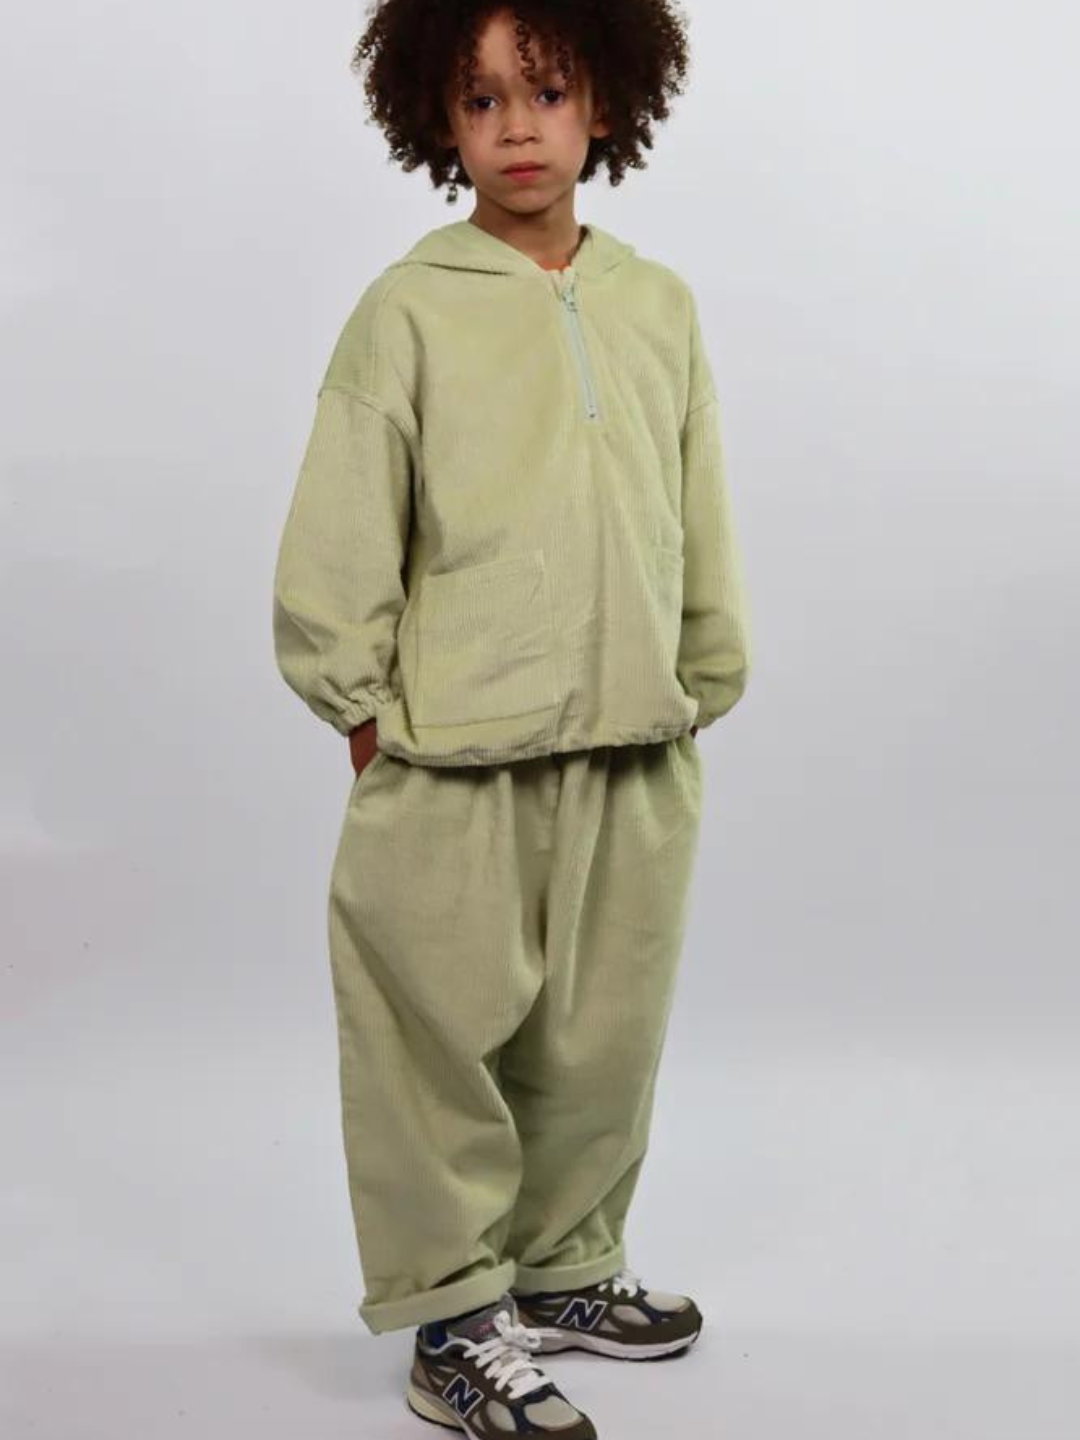 Light Pistachio | A child wearing a matching kids' hooded smock top and pants in light pistachio green